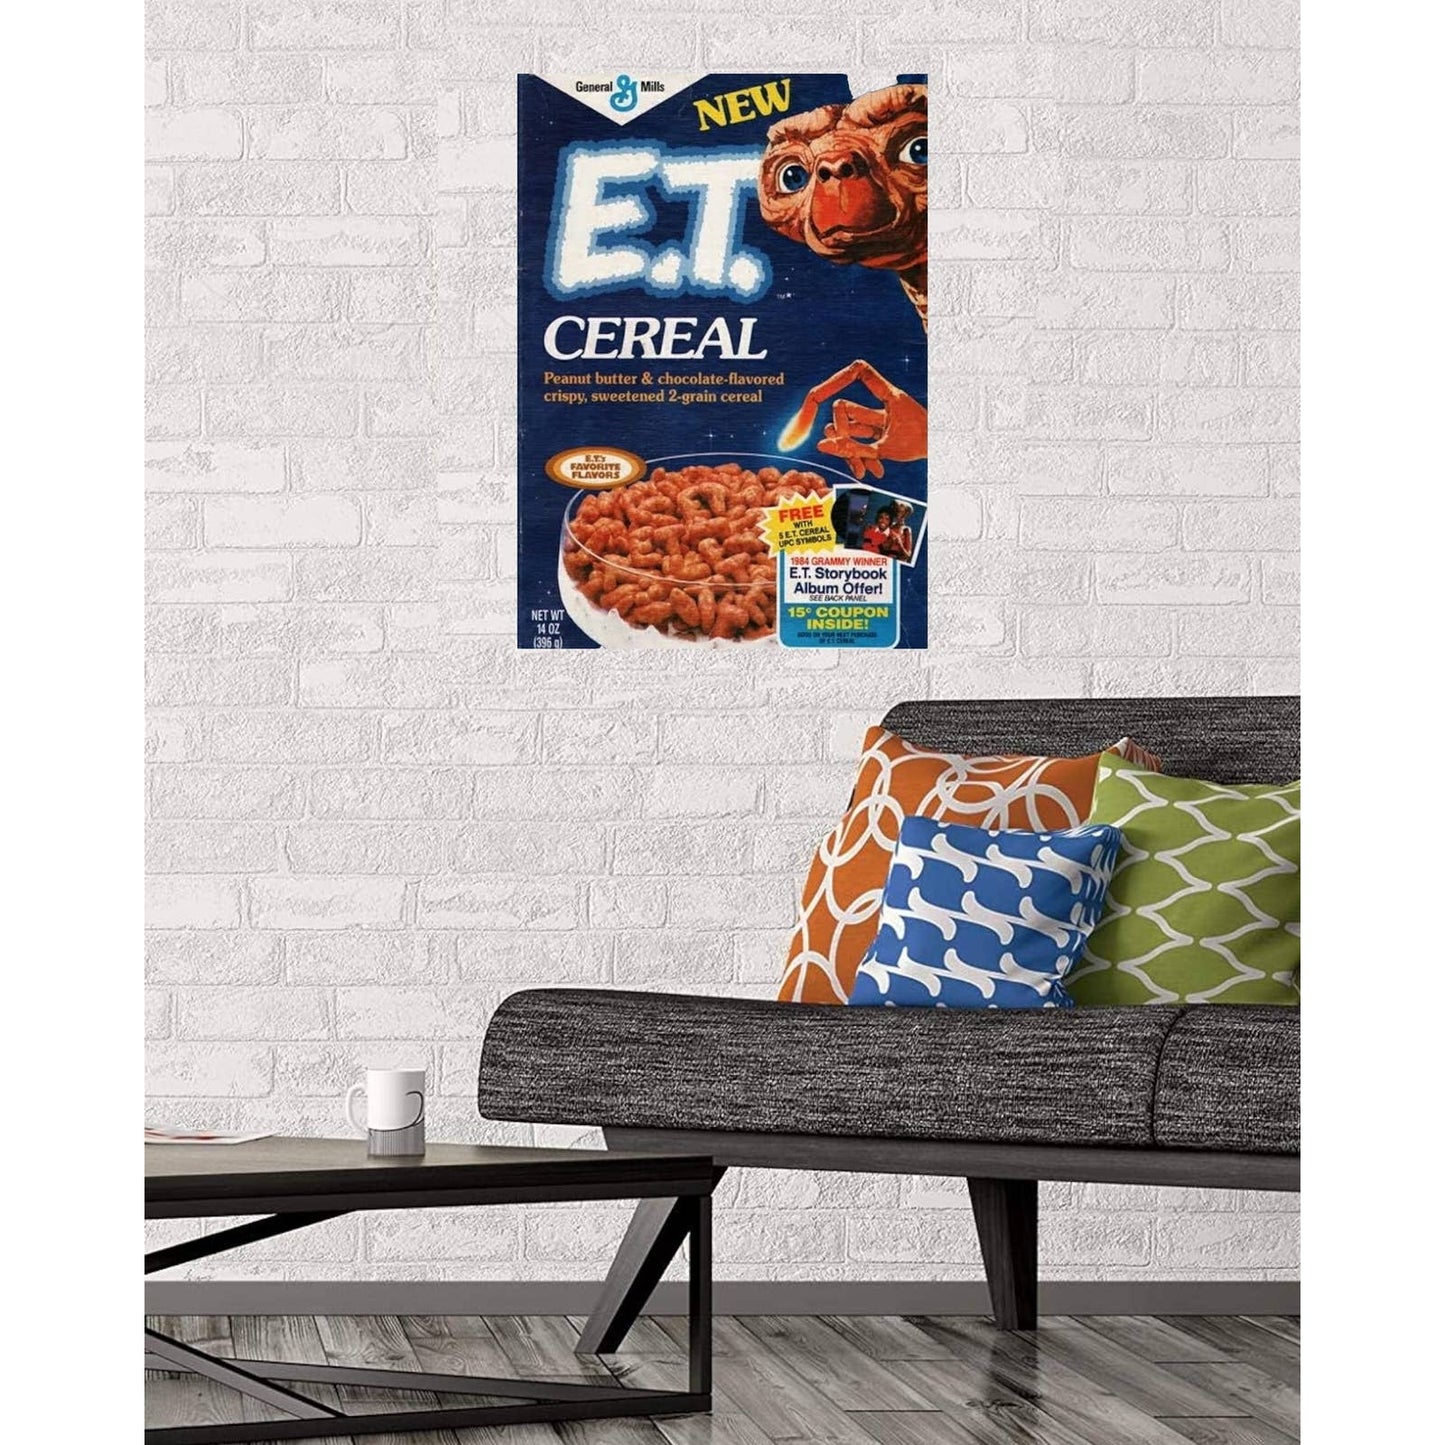 E.T. Cereal Box Cover Poster Print Wall Art 16"x24"